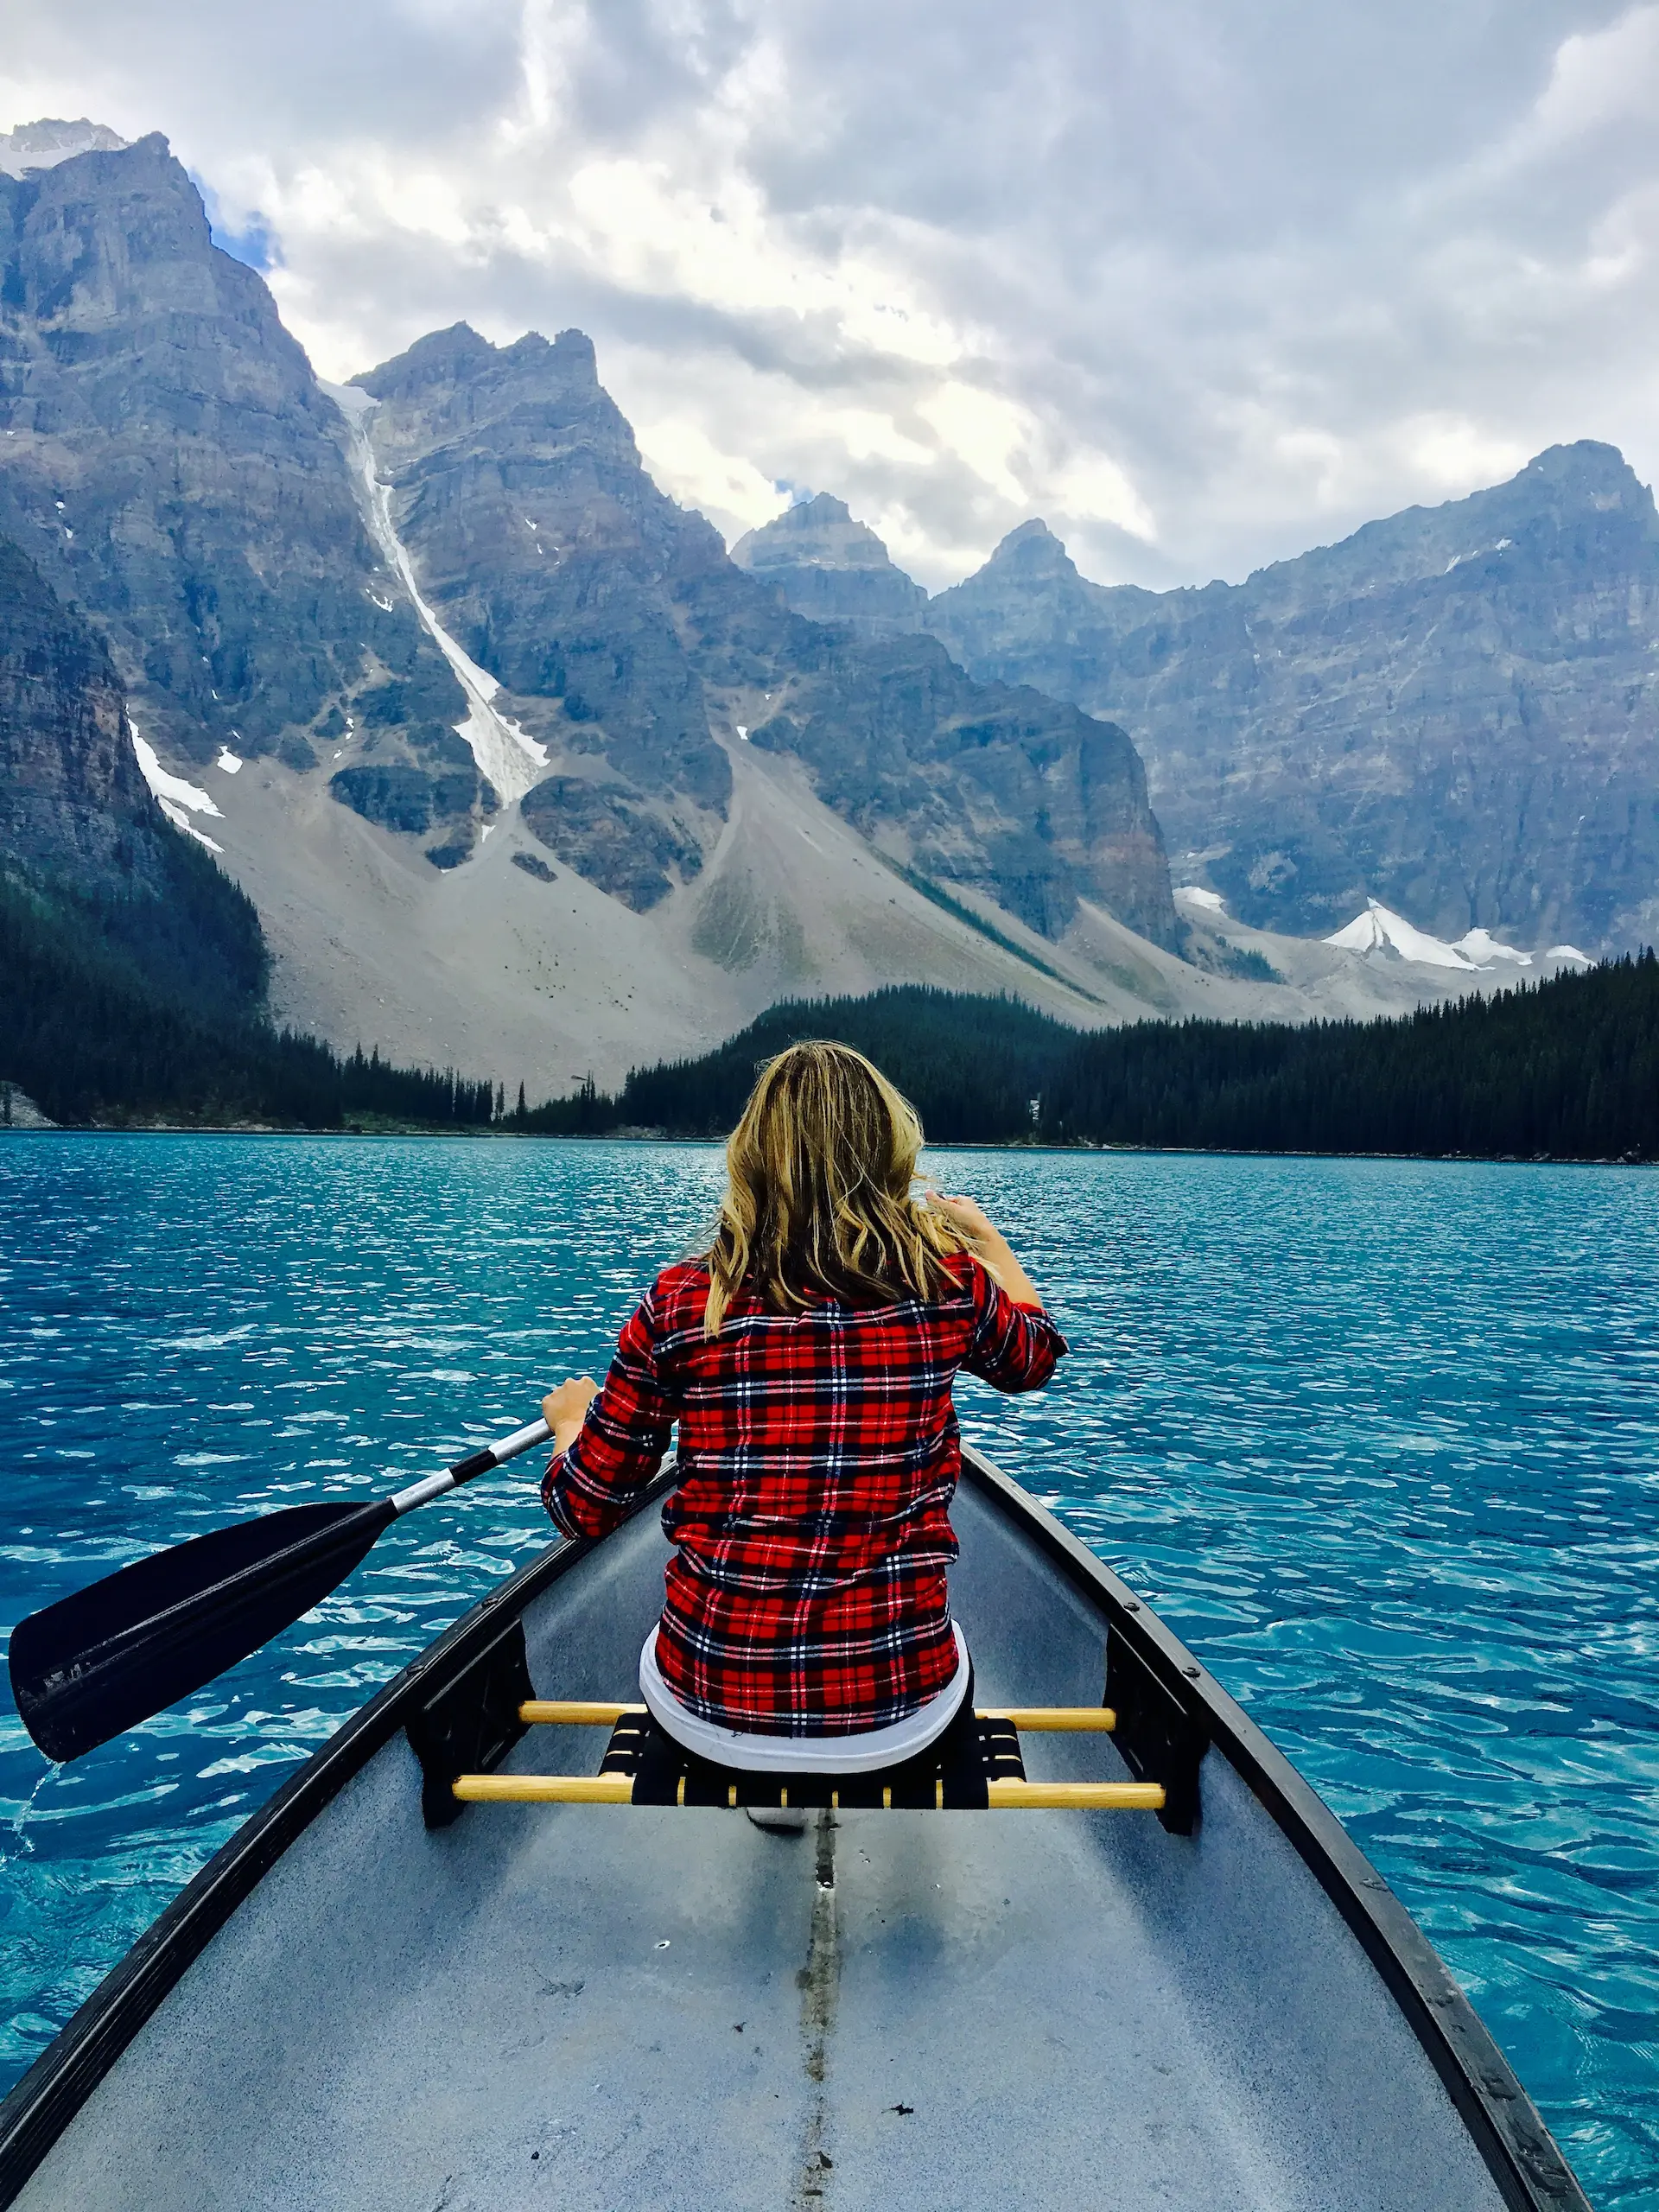 woman canoeing on a lake surrounded by high snowy mountains